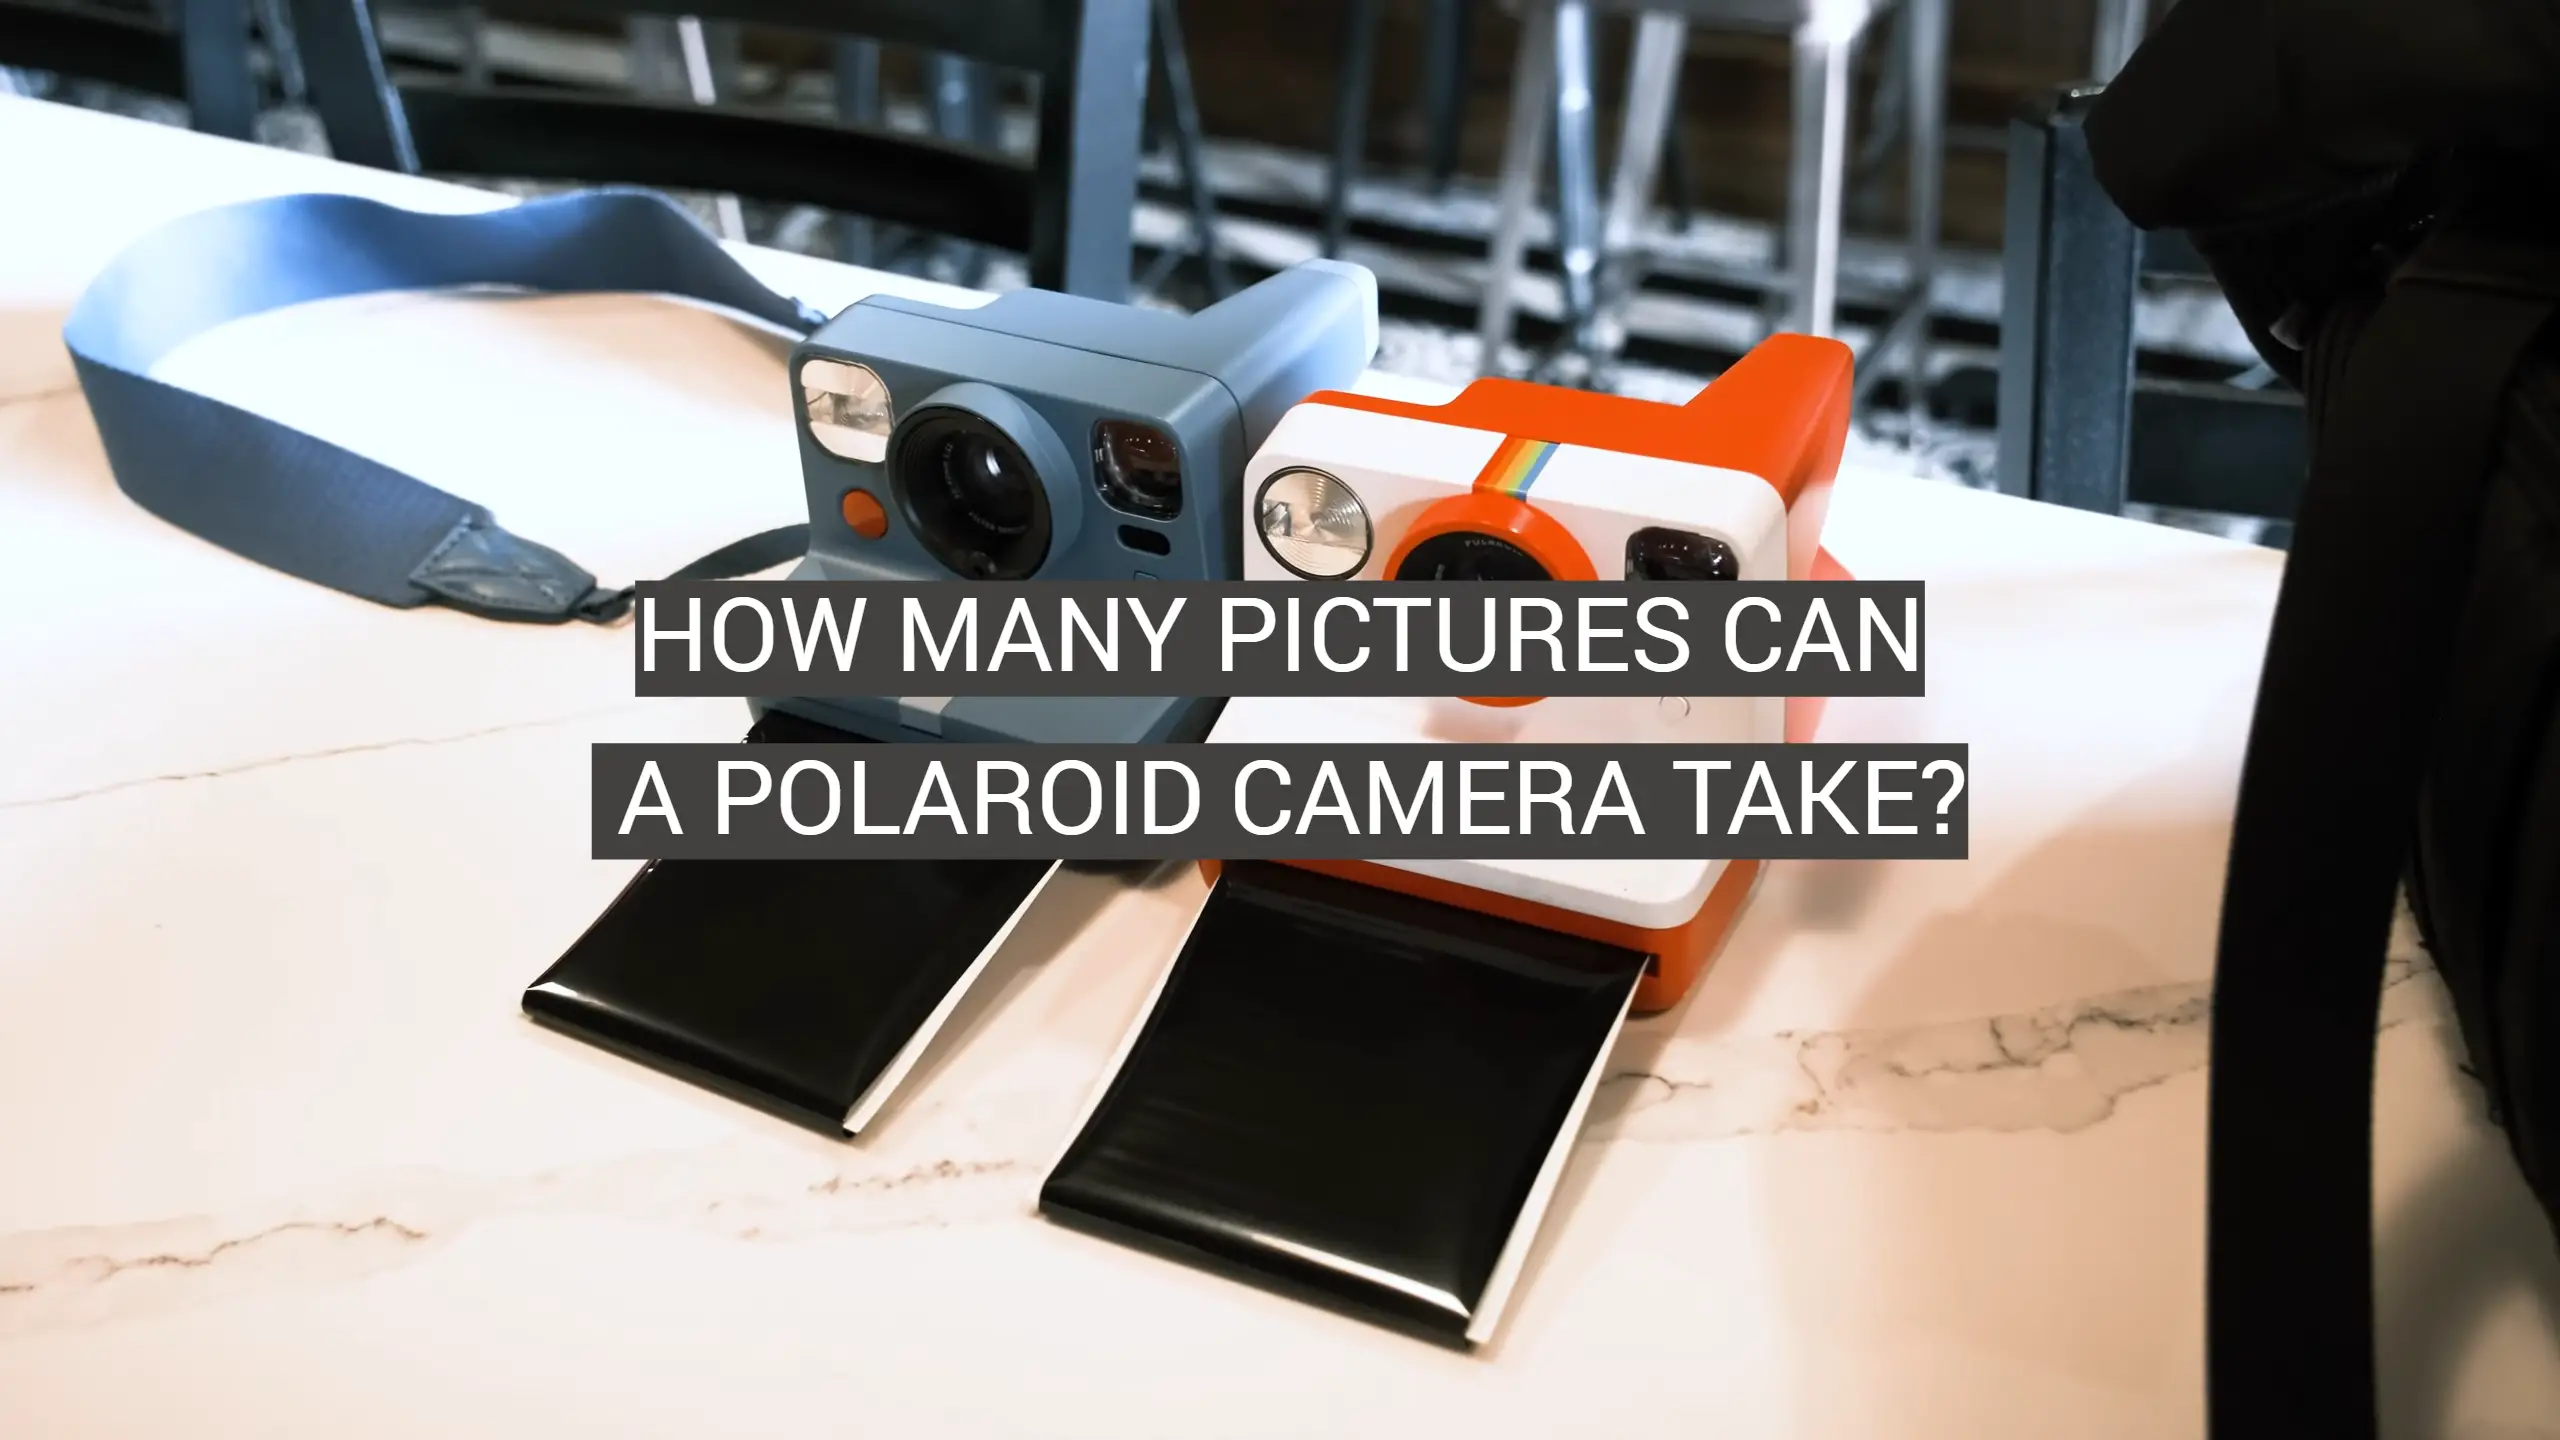 How Many Pictures Can a Polaroid Camera Take?